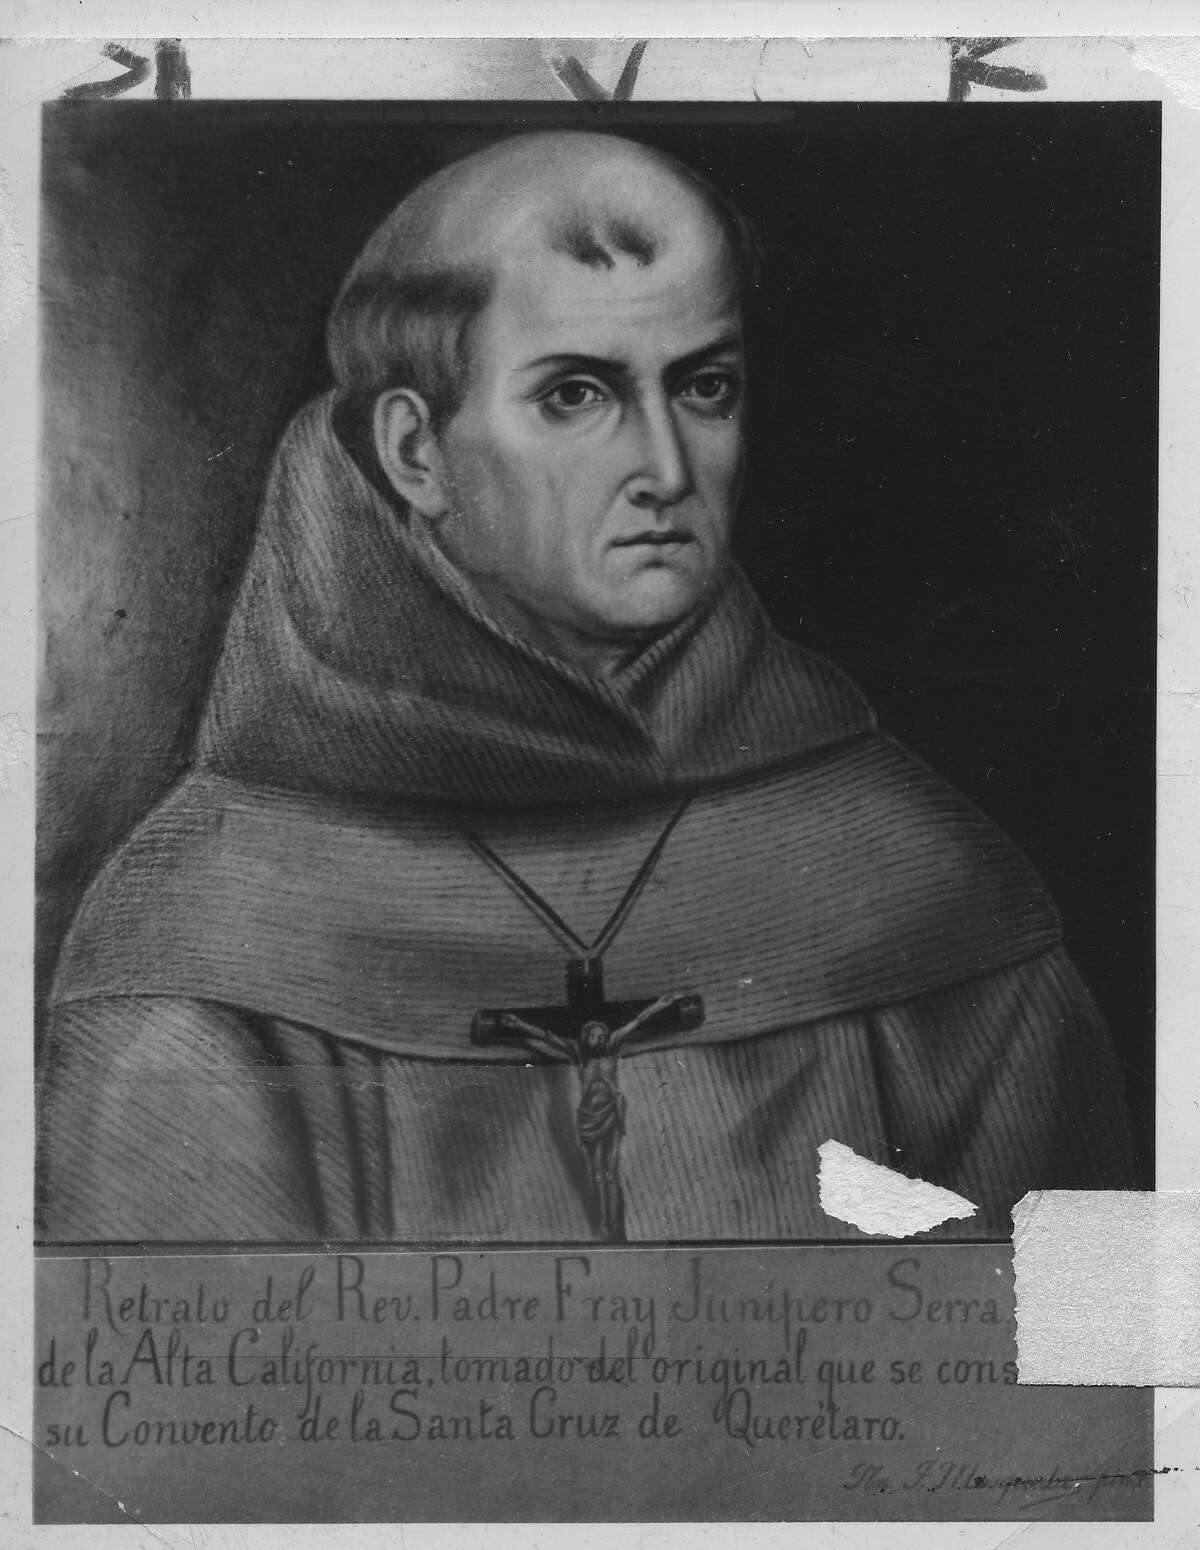 Father Junipero Serra will become a saint, Pope Francis announced.